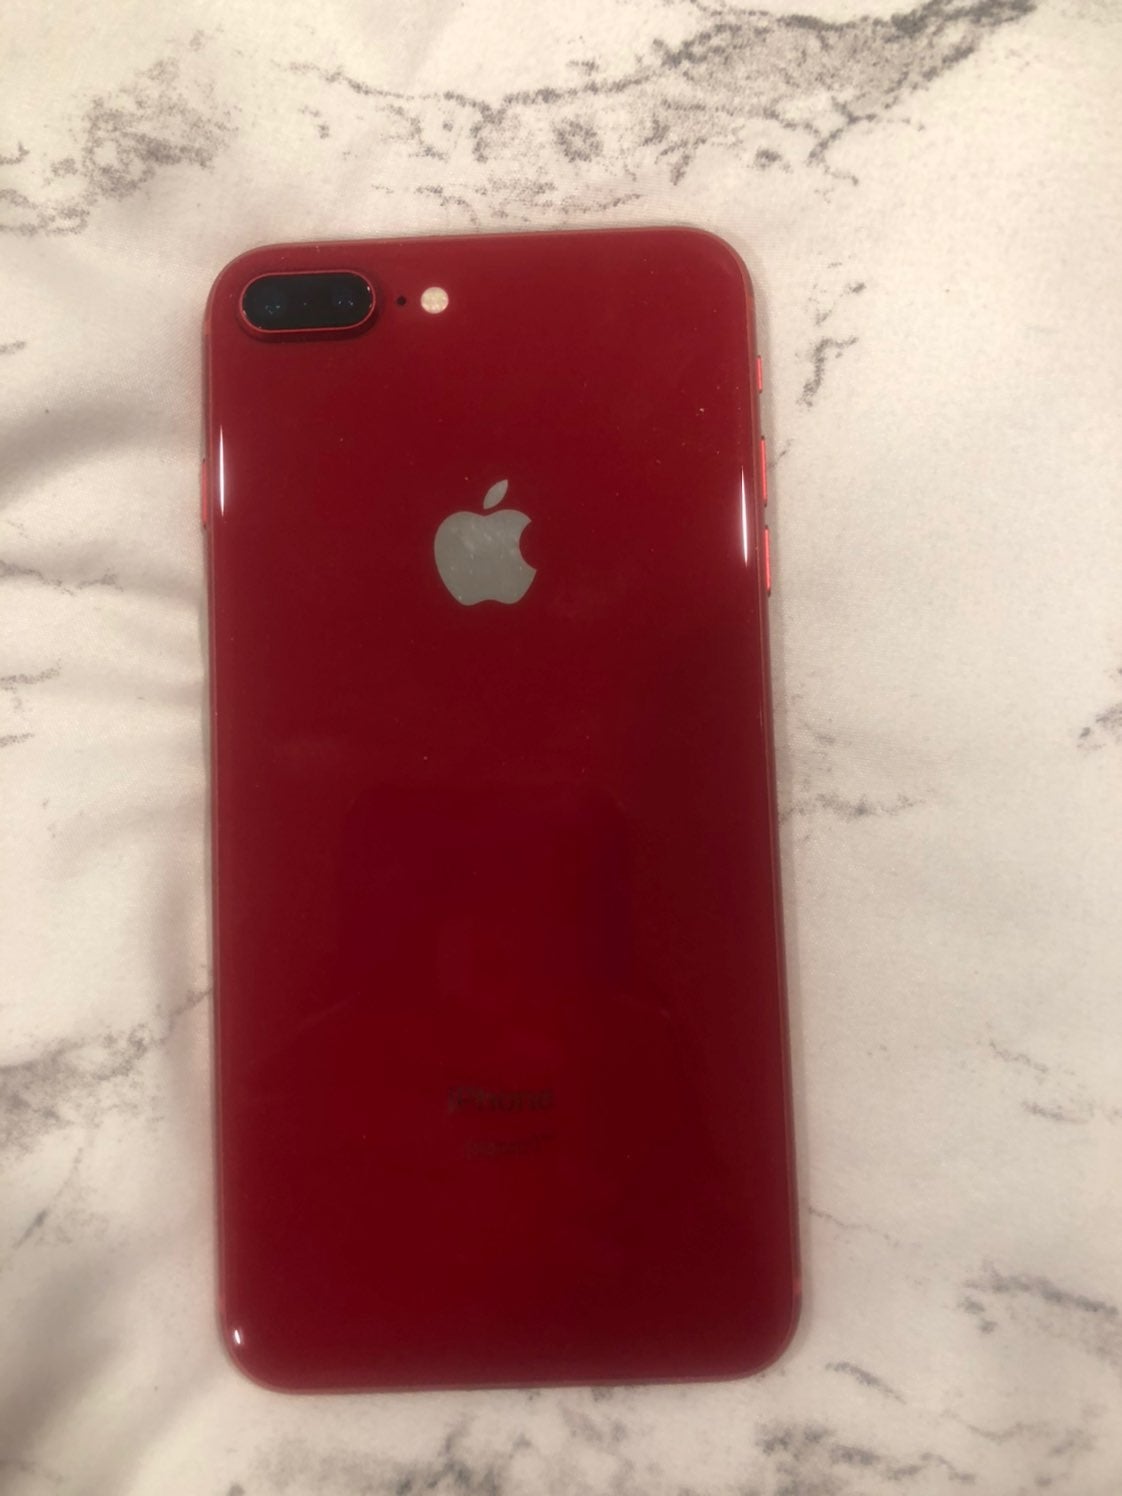 Iphone 8 plus – HollySale USA Classified, Buy Sell Shop Used Item Free